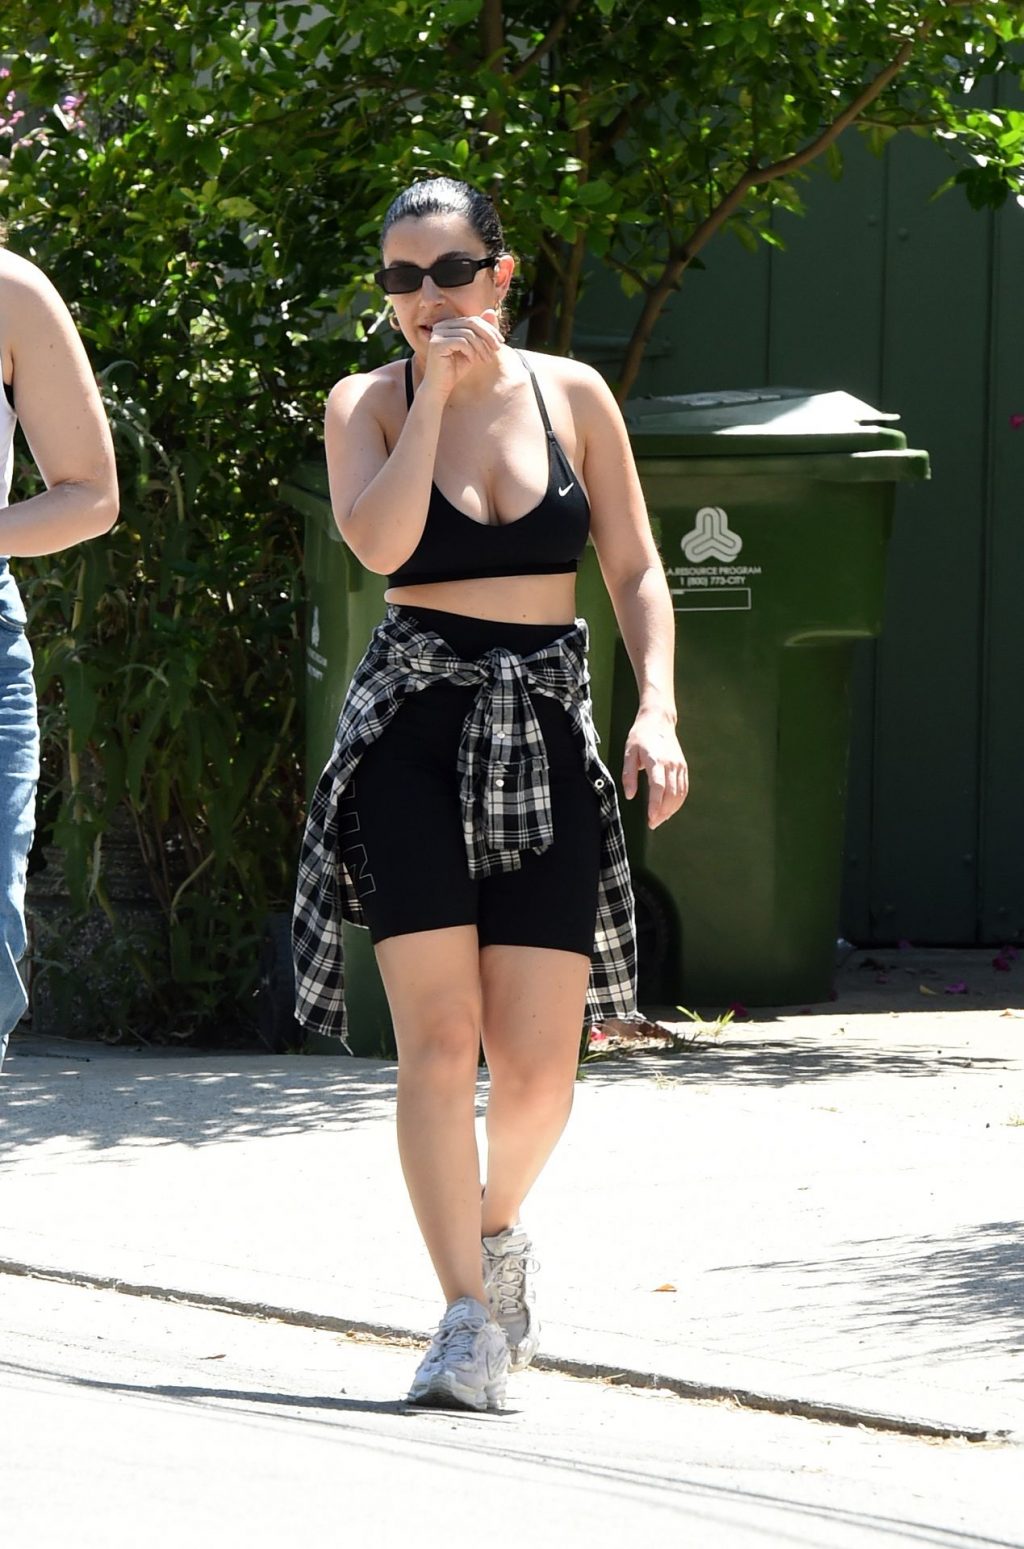 Busty Charli XCX is Pictured on a Stroll After Releasing a New Album (30 Photos)